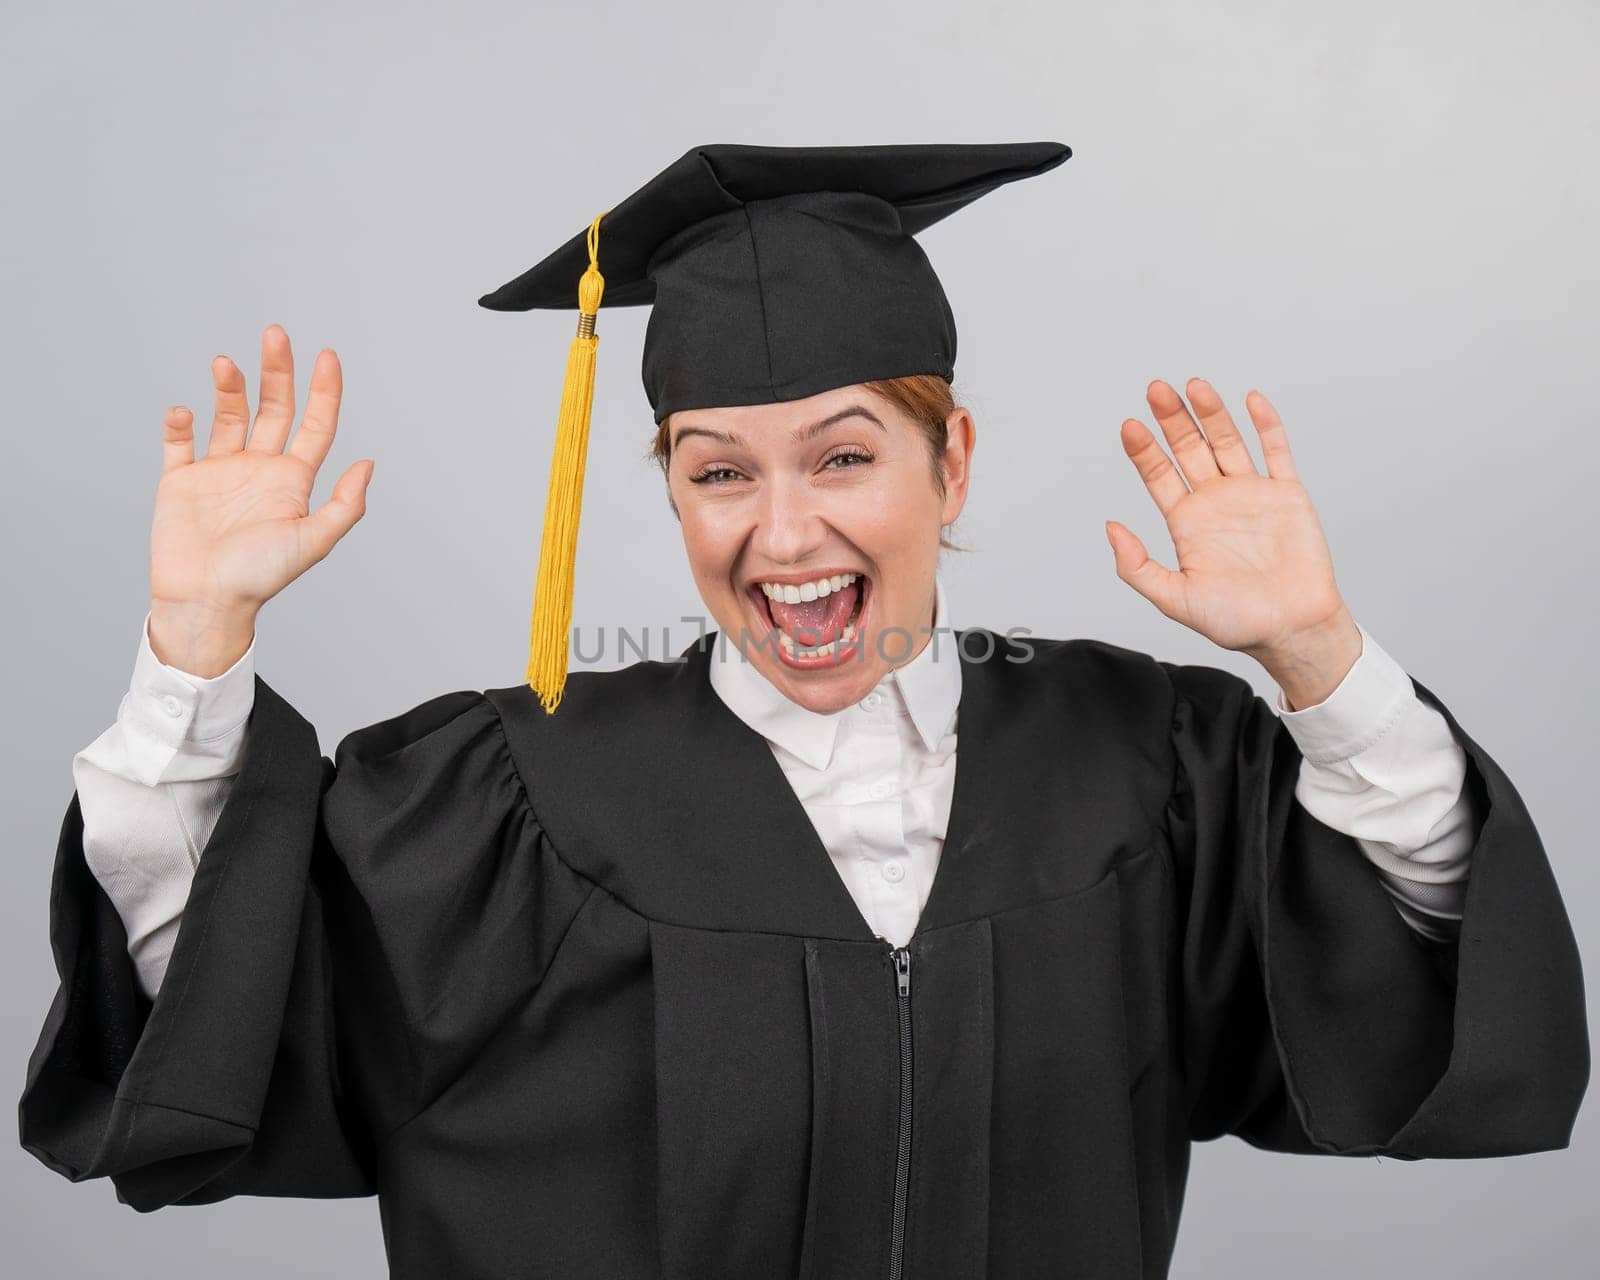 Caucasian woman dancing in graduation gown on white background. by mrwed54